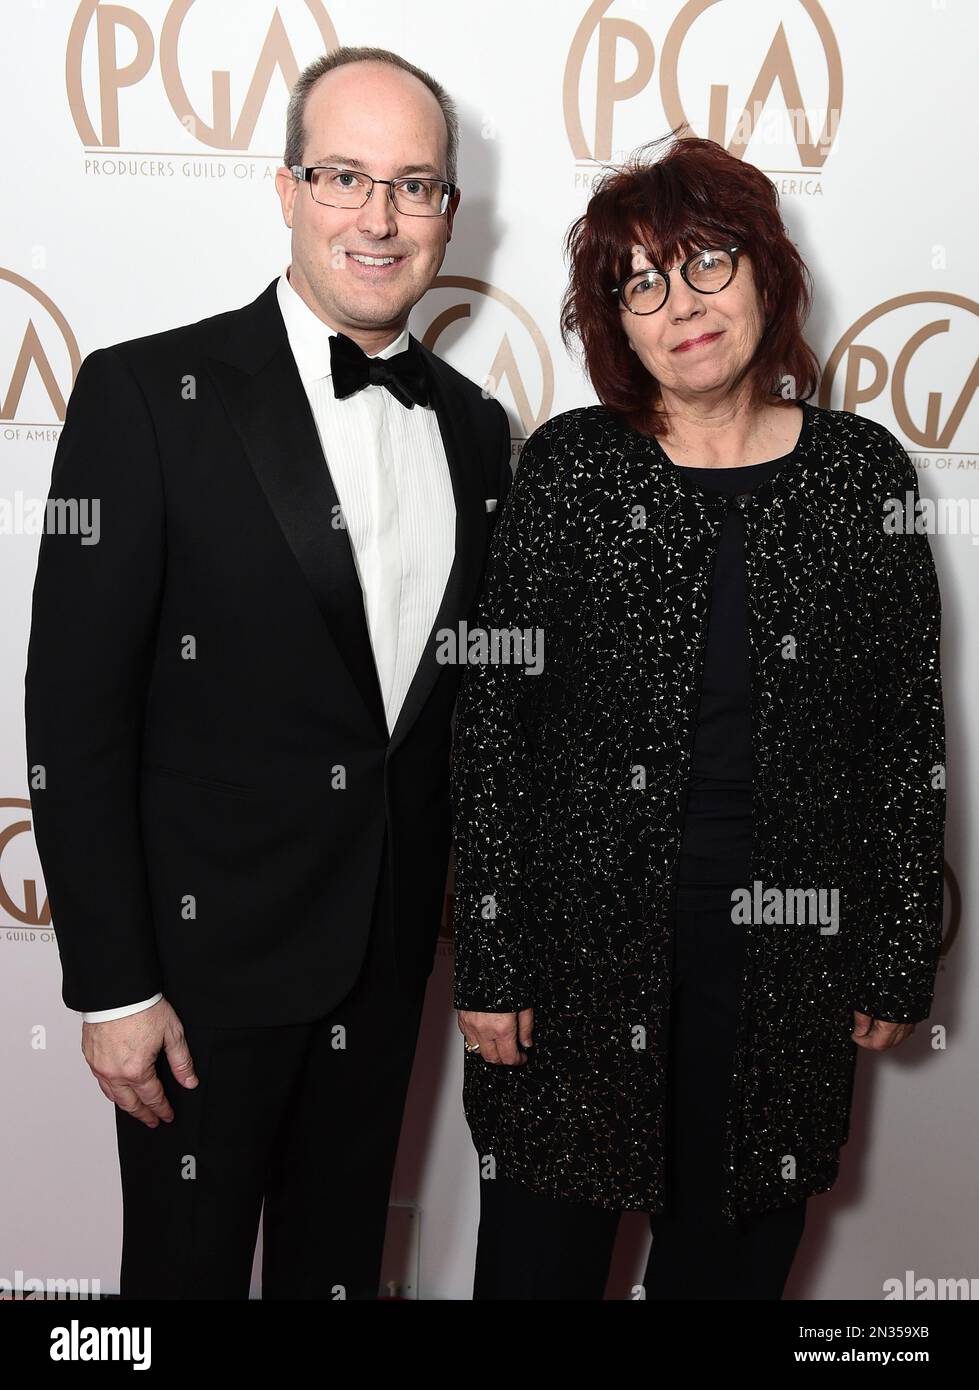 Andrew Decristofaro And Becky Sullivan Arrive At The 26th Annual Producers Guild Awards At The